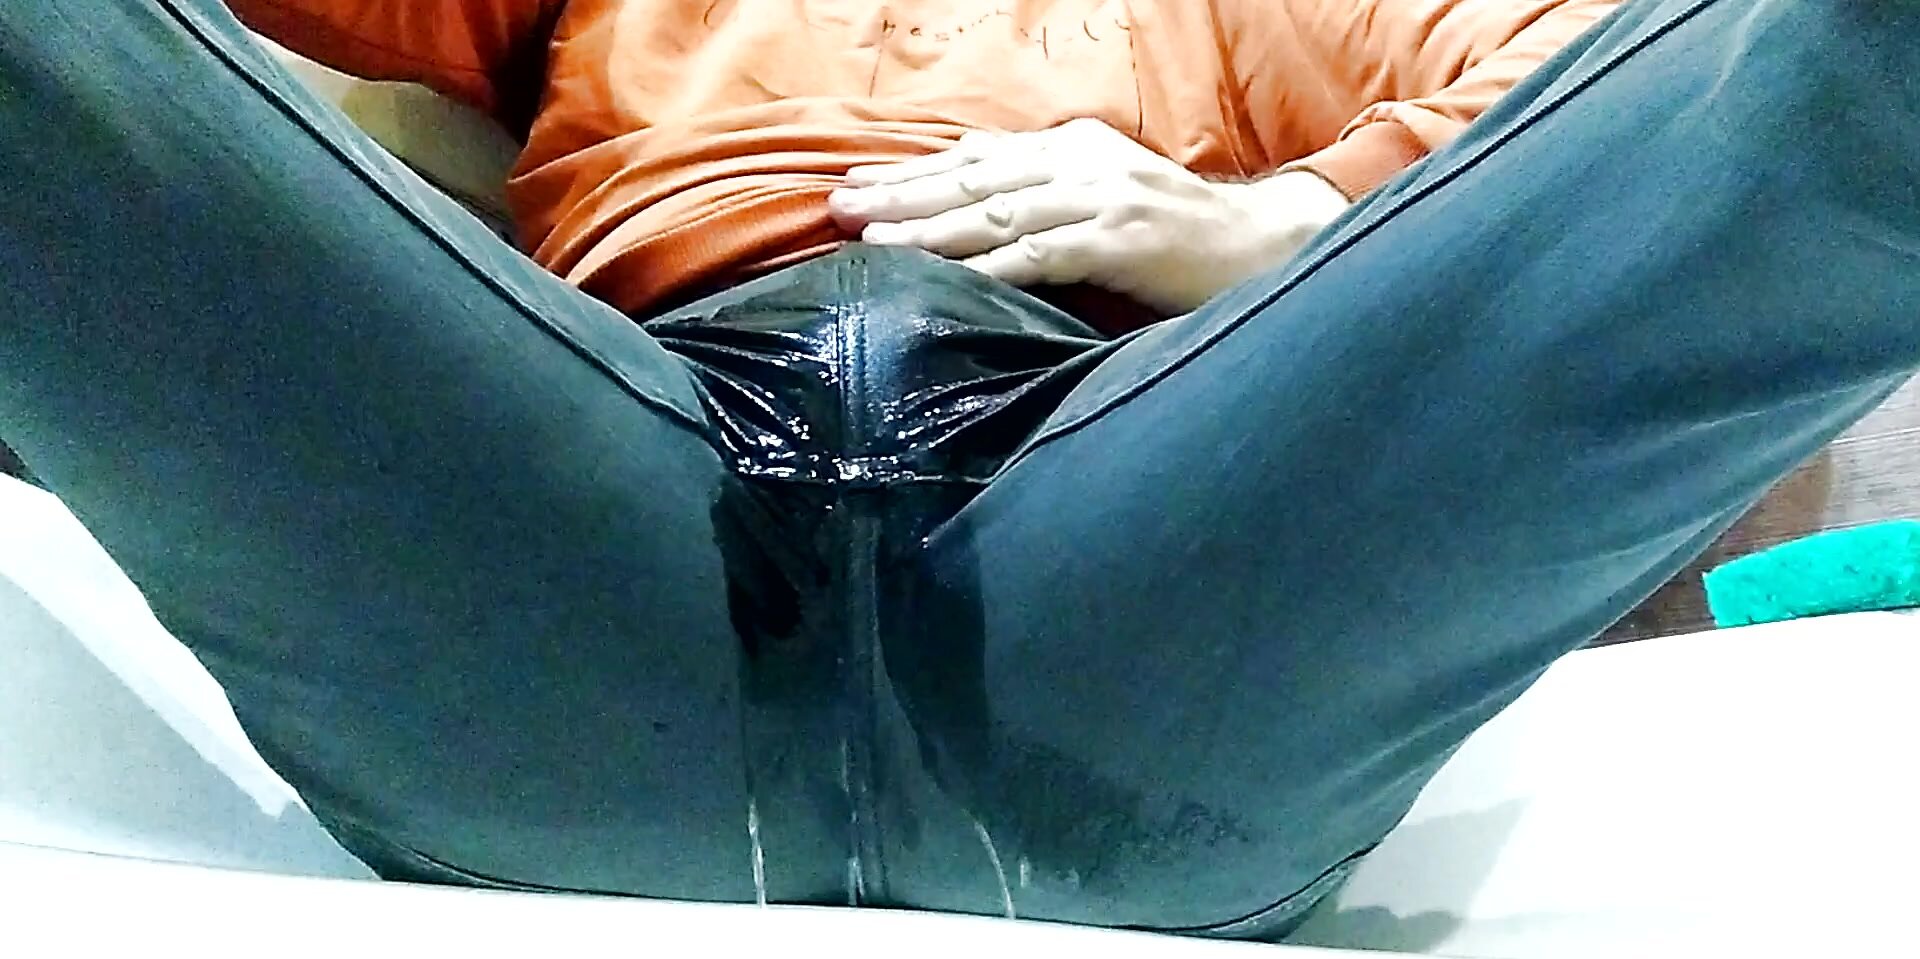 Jeans pissing - video 7